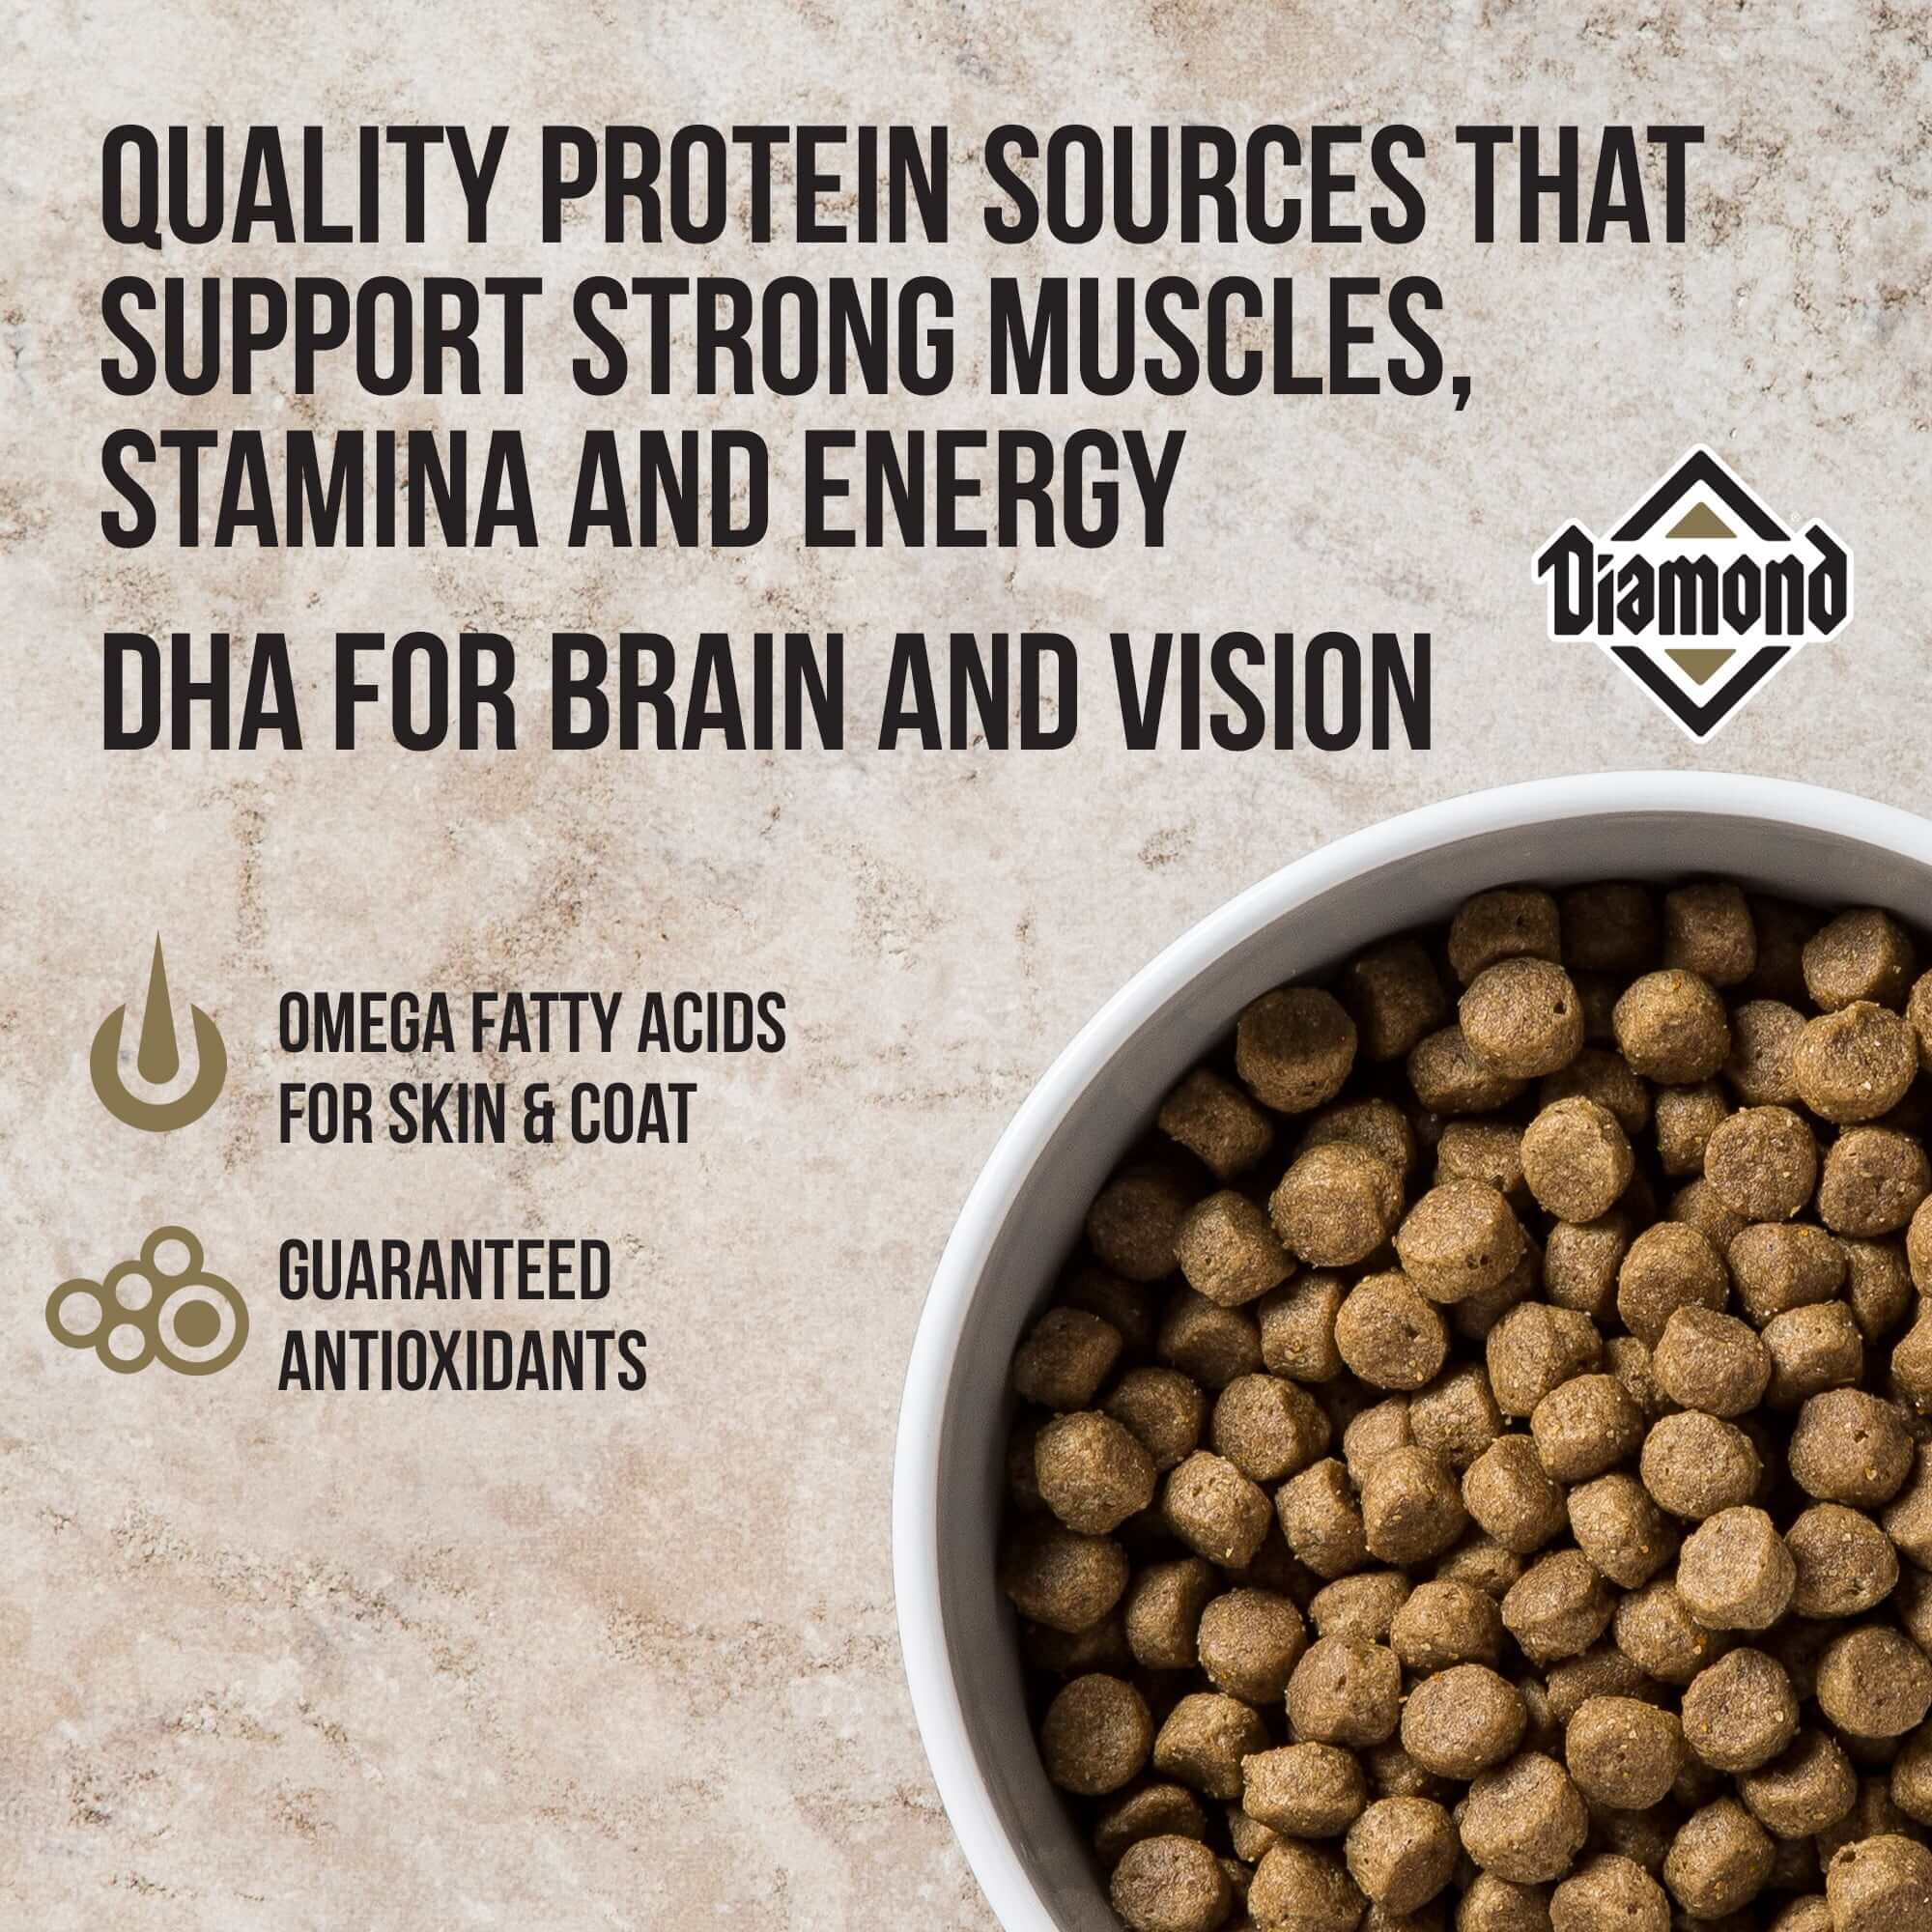 Quality protein sources that support strong muscles, stamina and energy